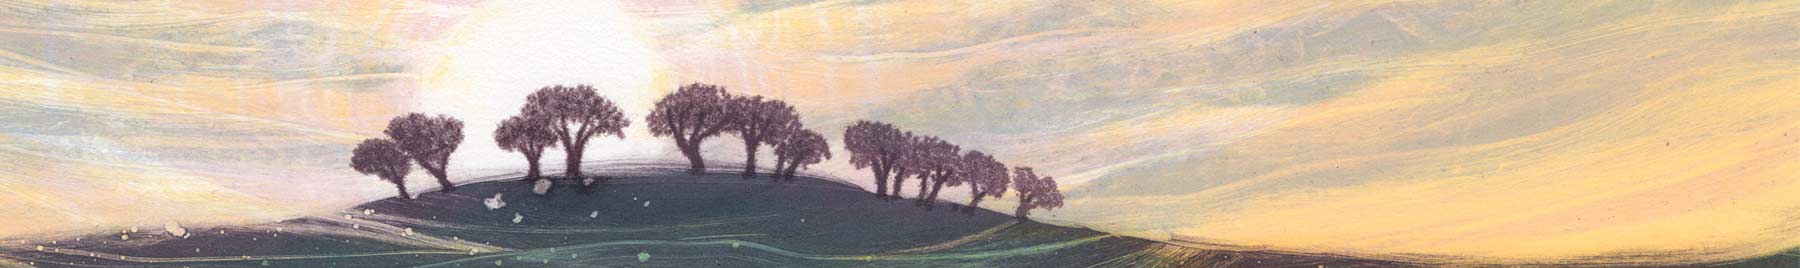 drawing of trees silhouetted against a yellow sunrise